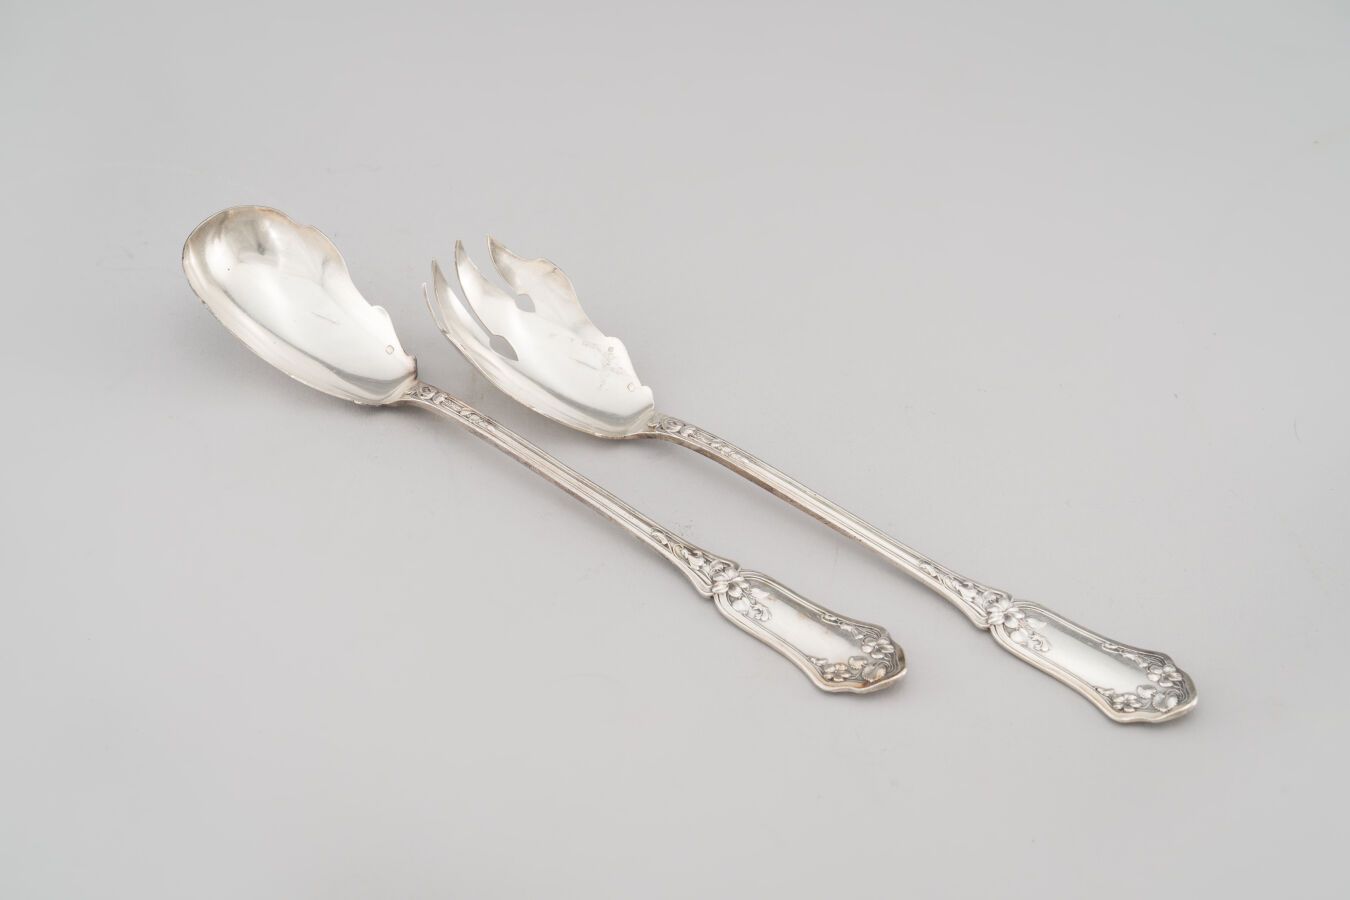 Null 85. Silver salad set (950/1000th), foliage model.
Weight : 173 g.